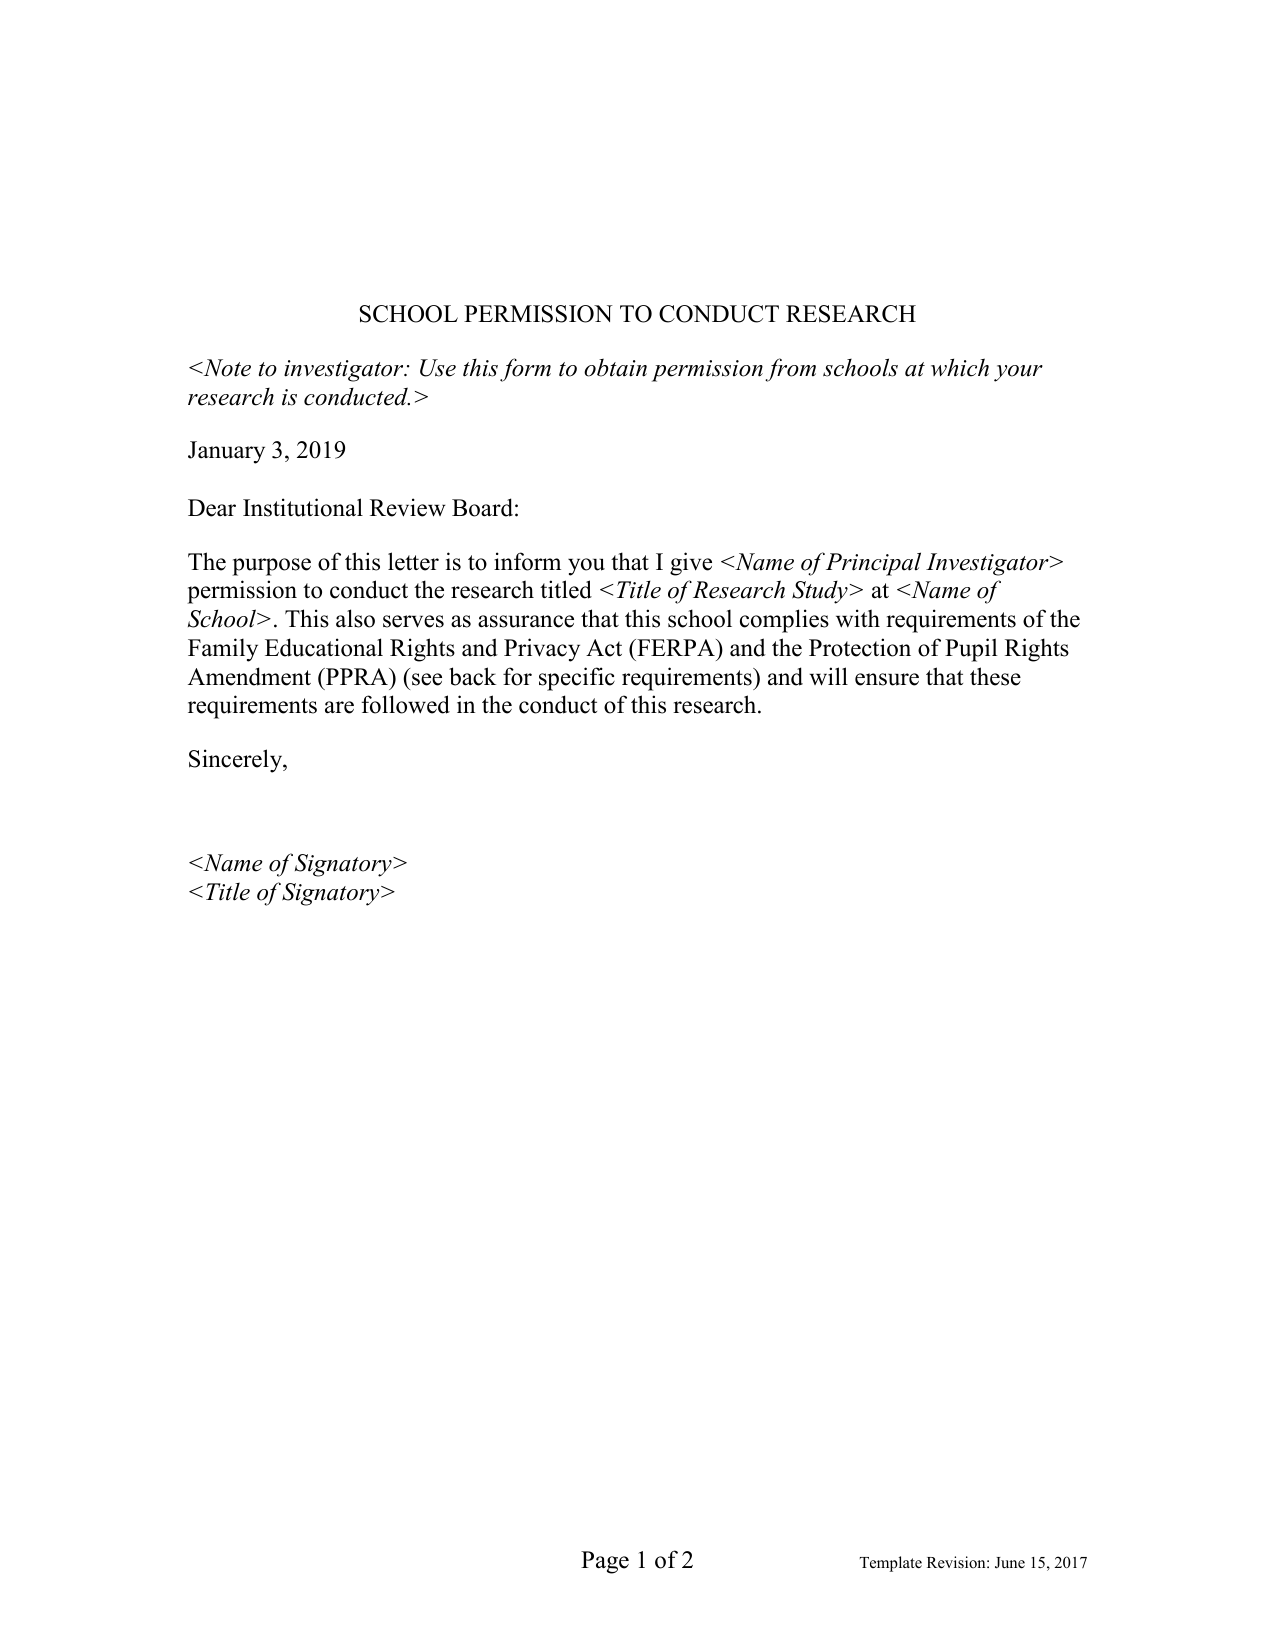 HRP-504-TEMPLATE-LETTER-School-Permission-to-Conduct ...